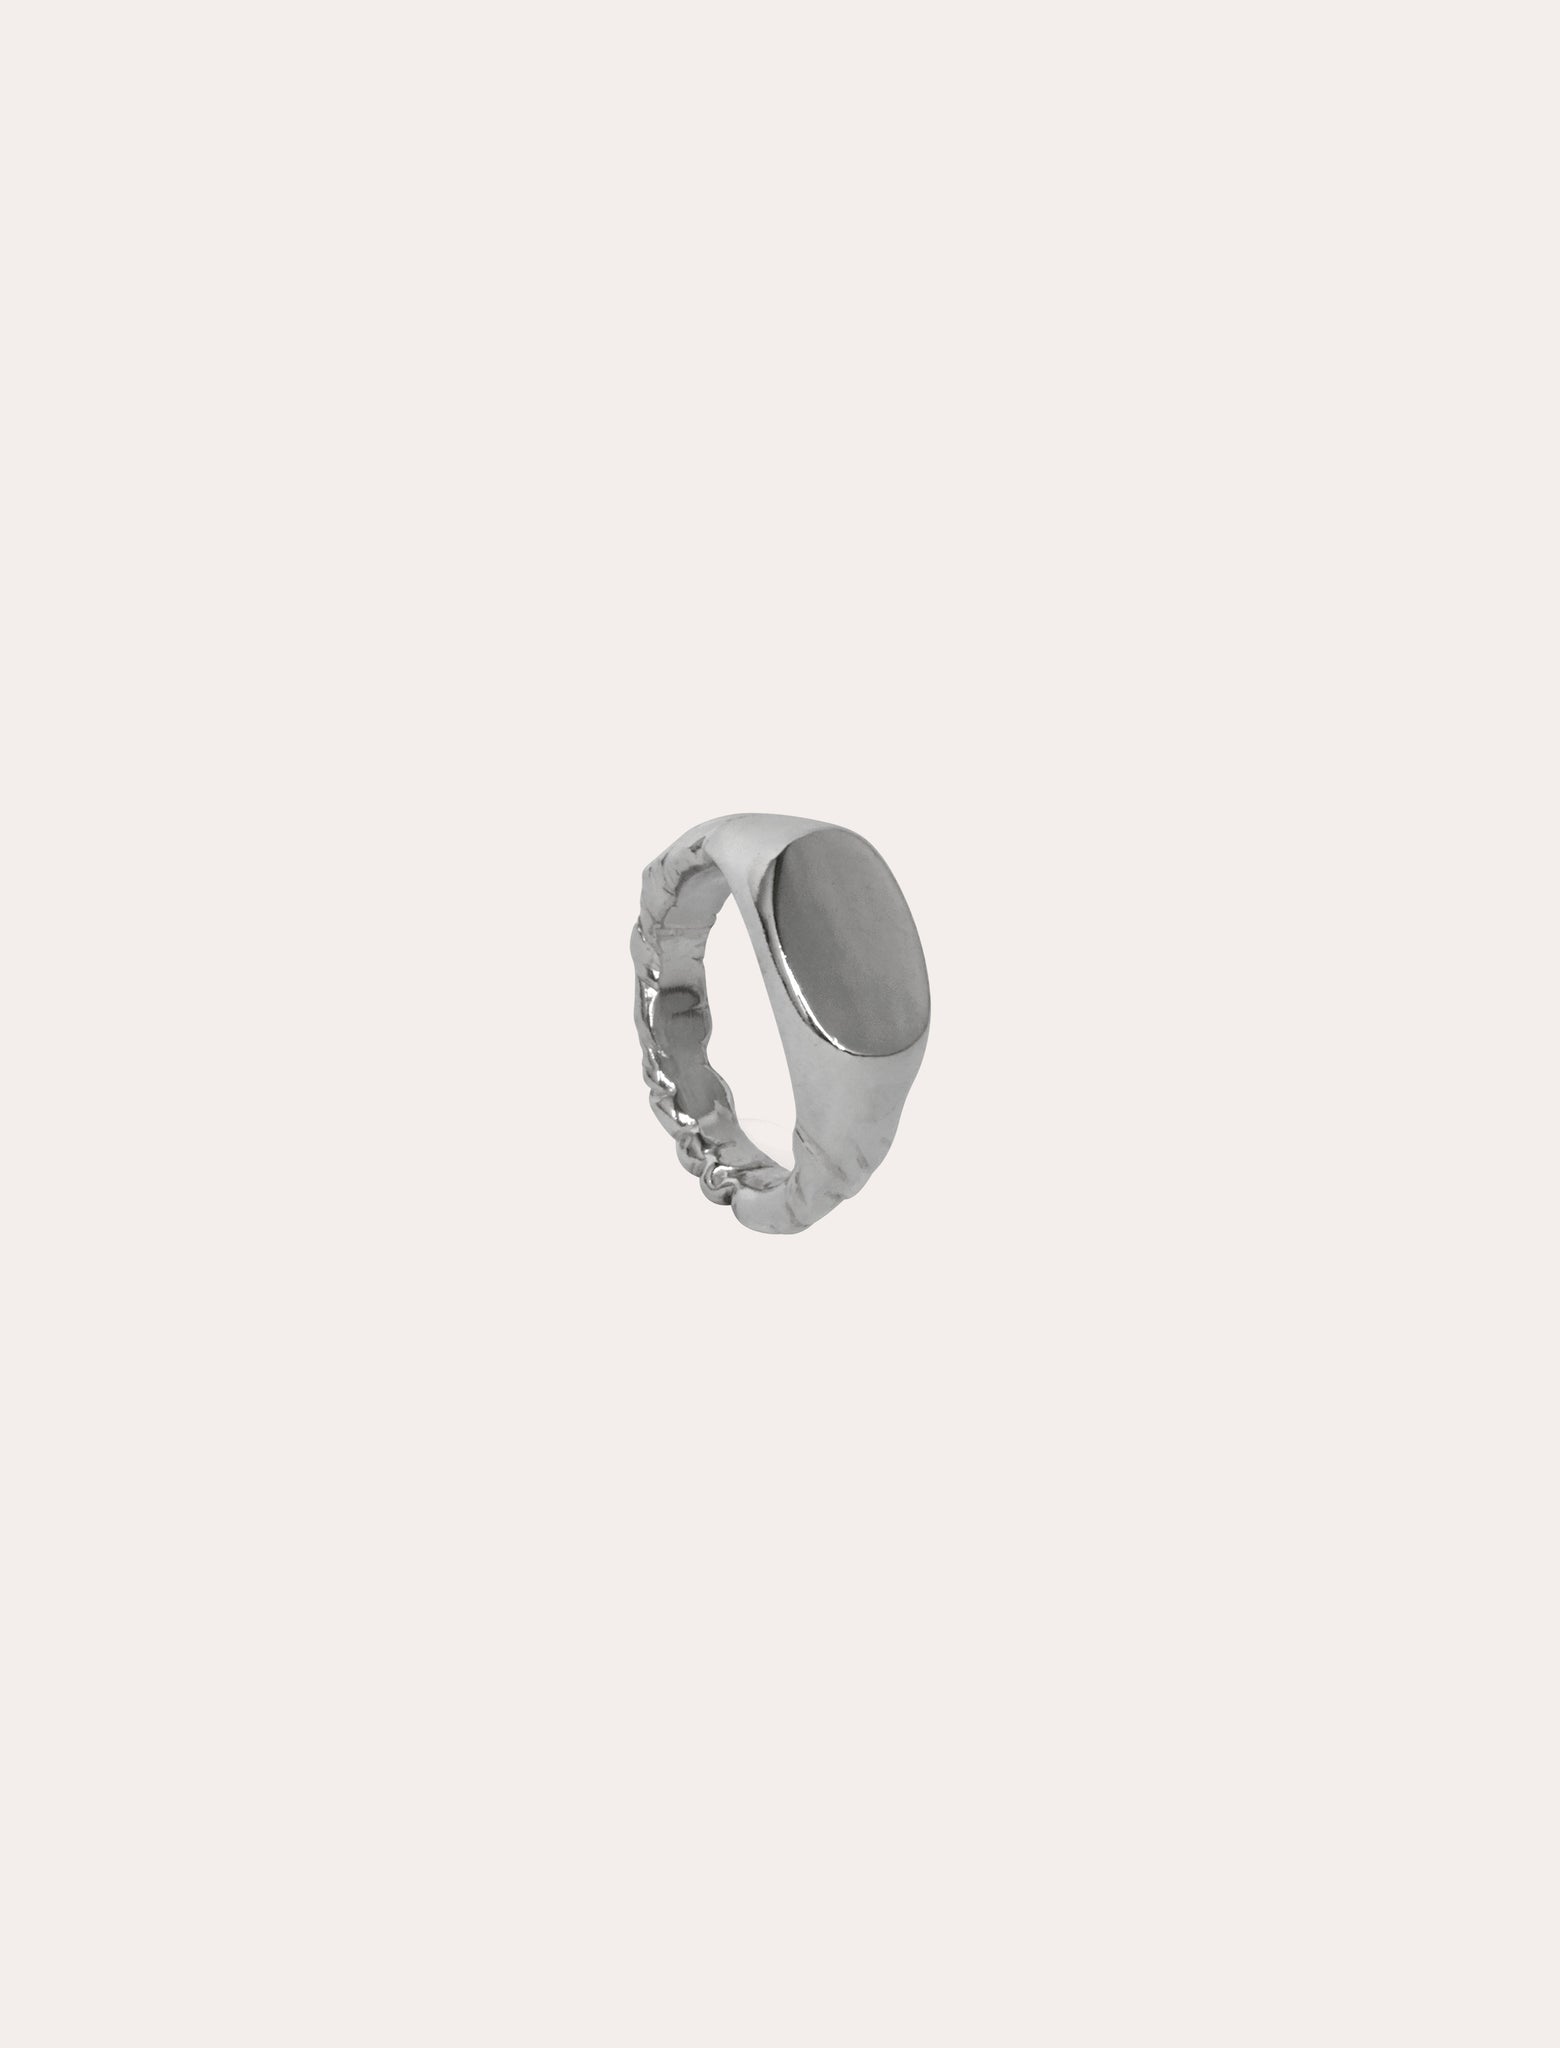 ANOTHER ASPECT x Corali, Koyubi Ring Sterling Silver